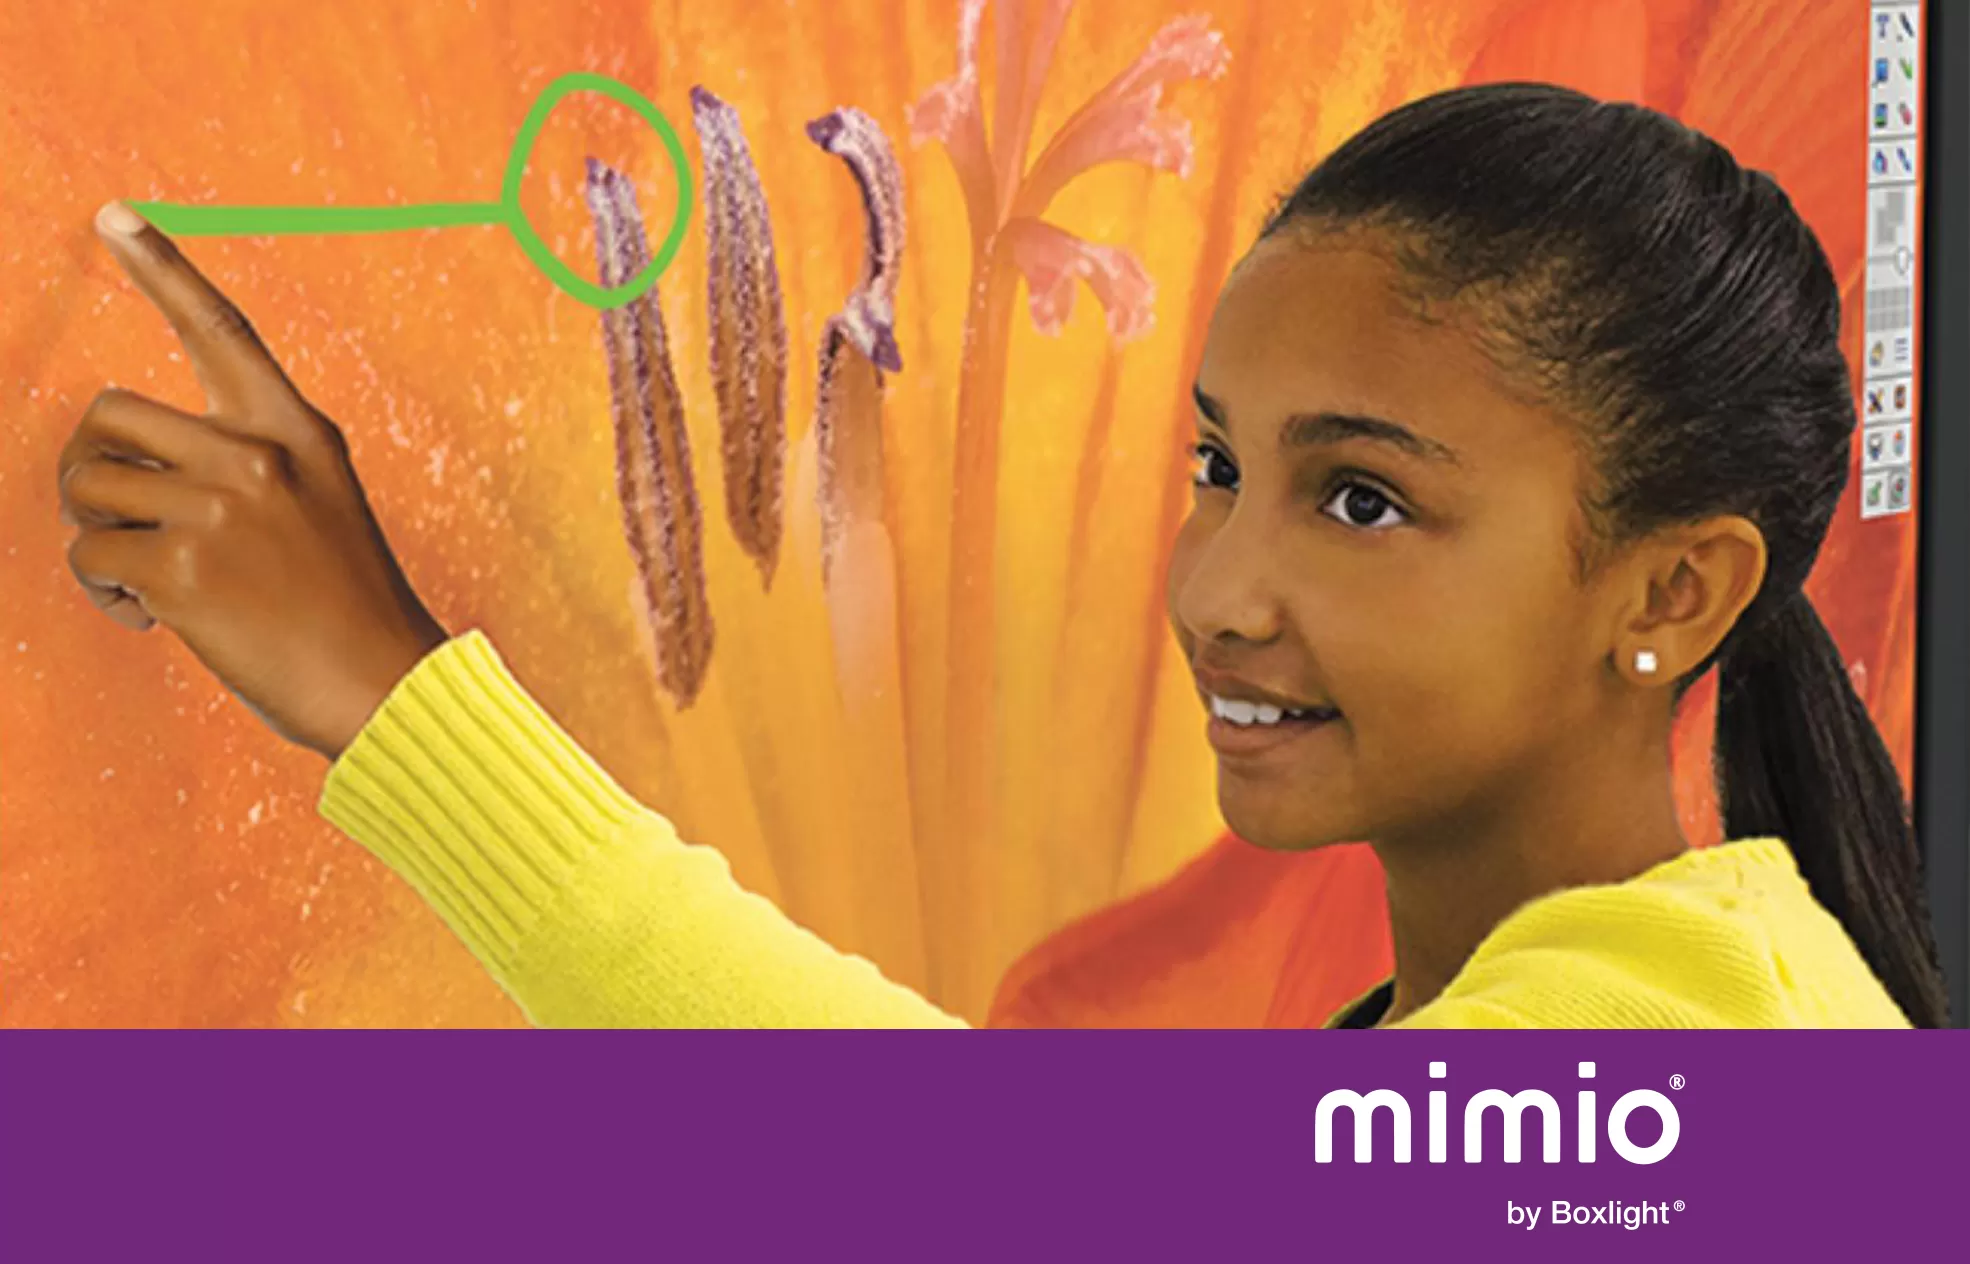 student using mimio studio with purple banner saying 'mimio by boxlight' at the bottom